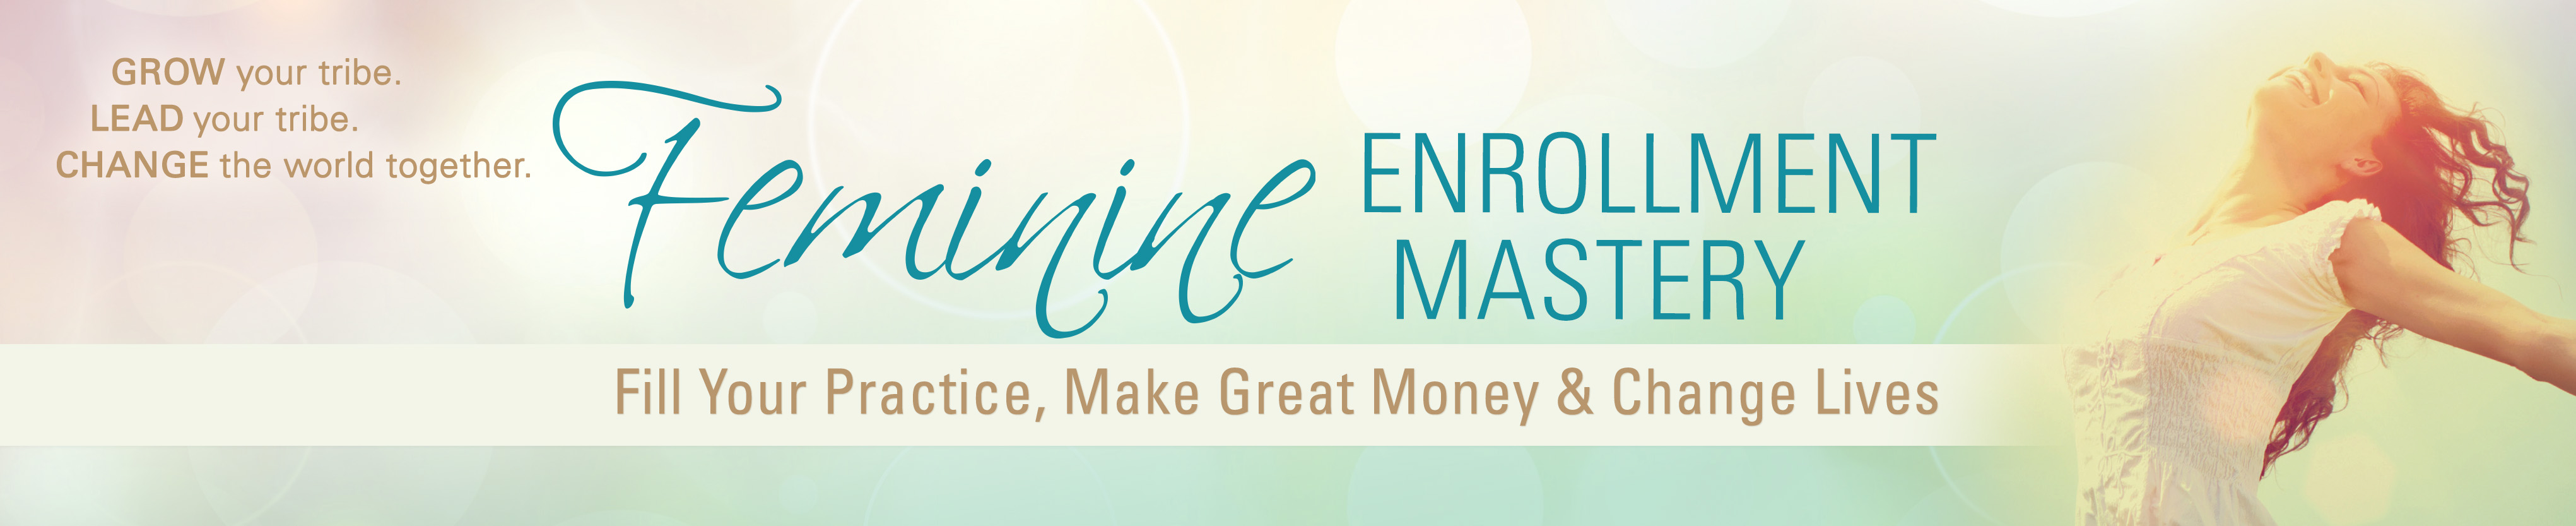 Enrollment Mastery Training Course Welcome